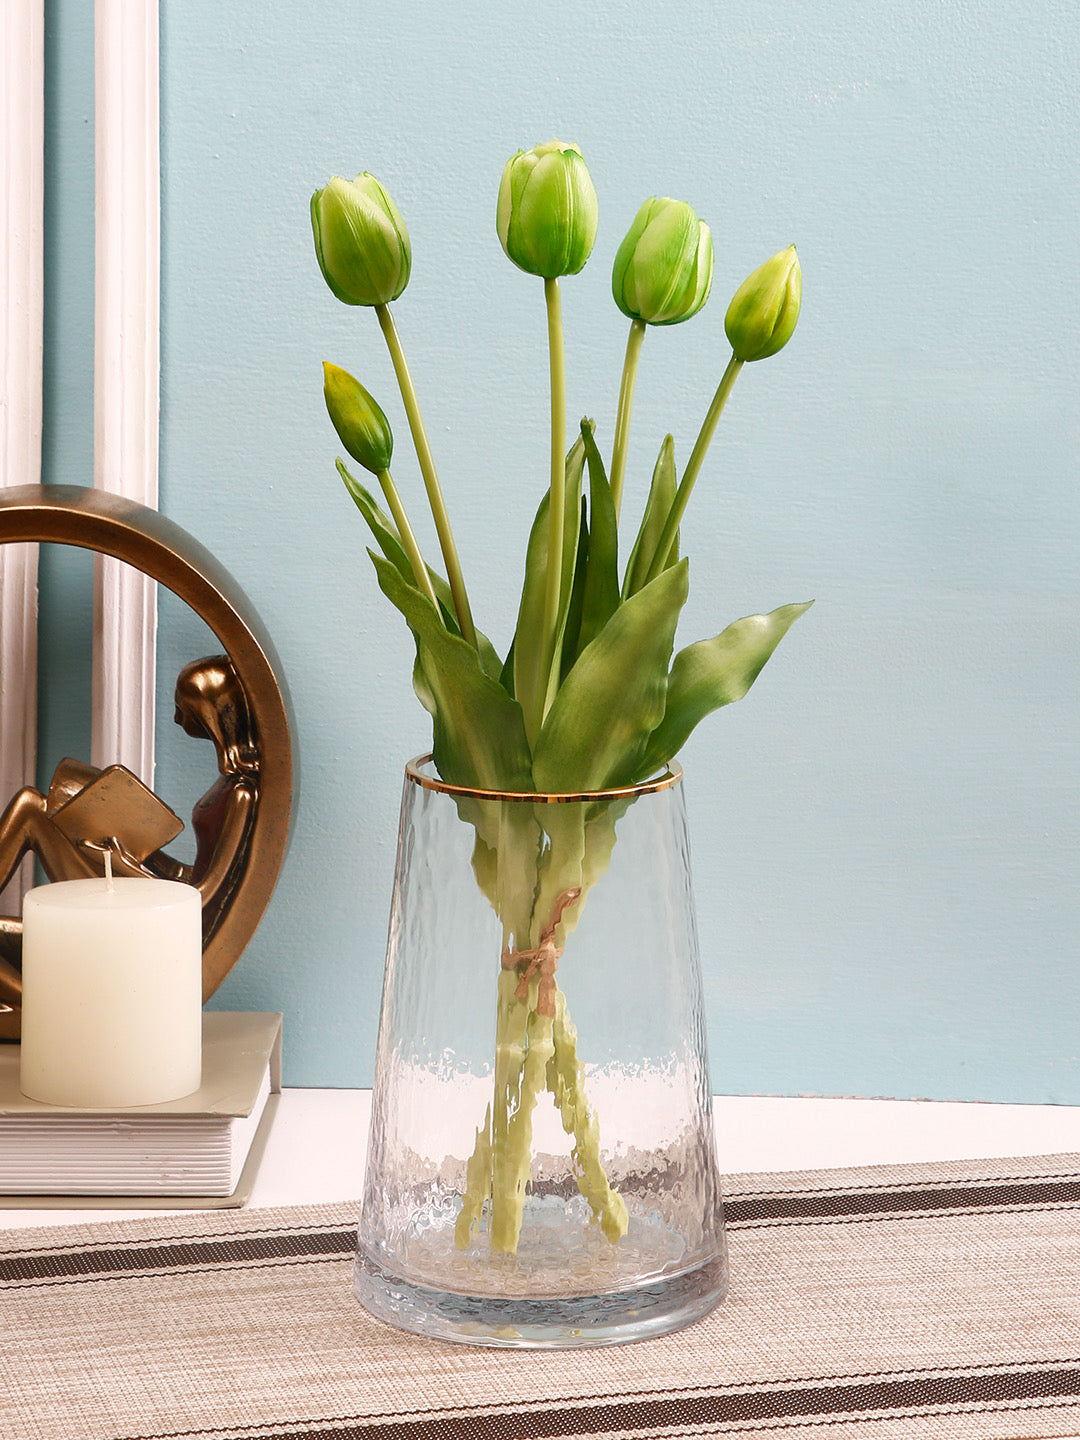 Set of 5 Alluring bunch of Real alike Tulip Flowers and Buds in Green - Default Title (FL21205GR)